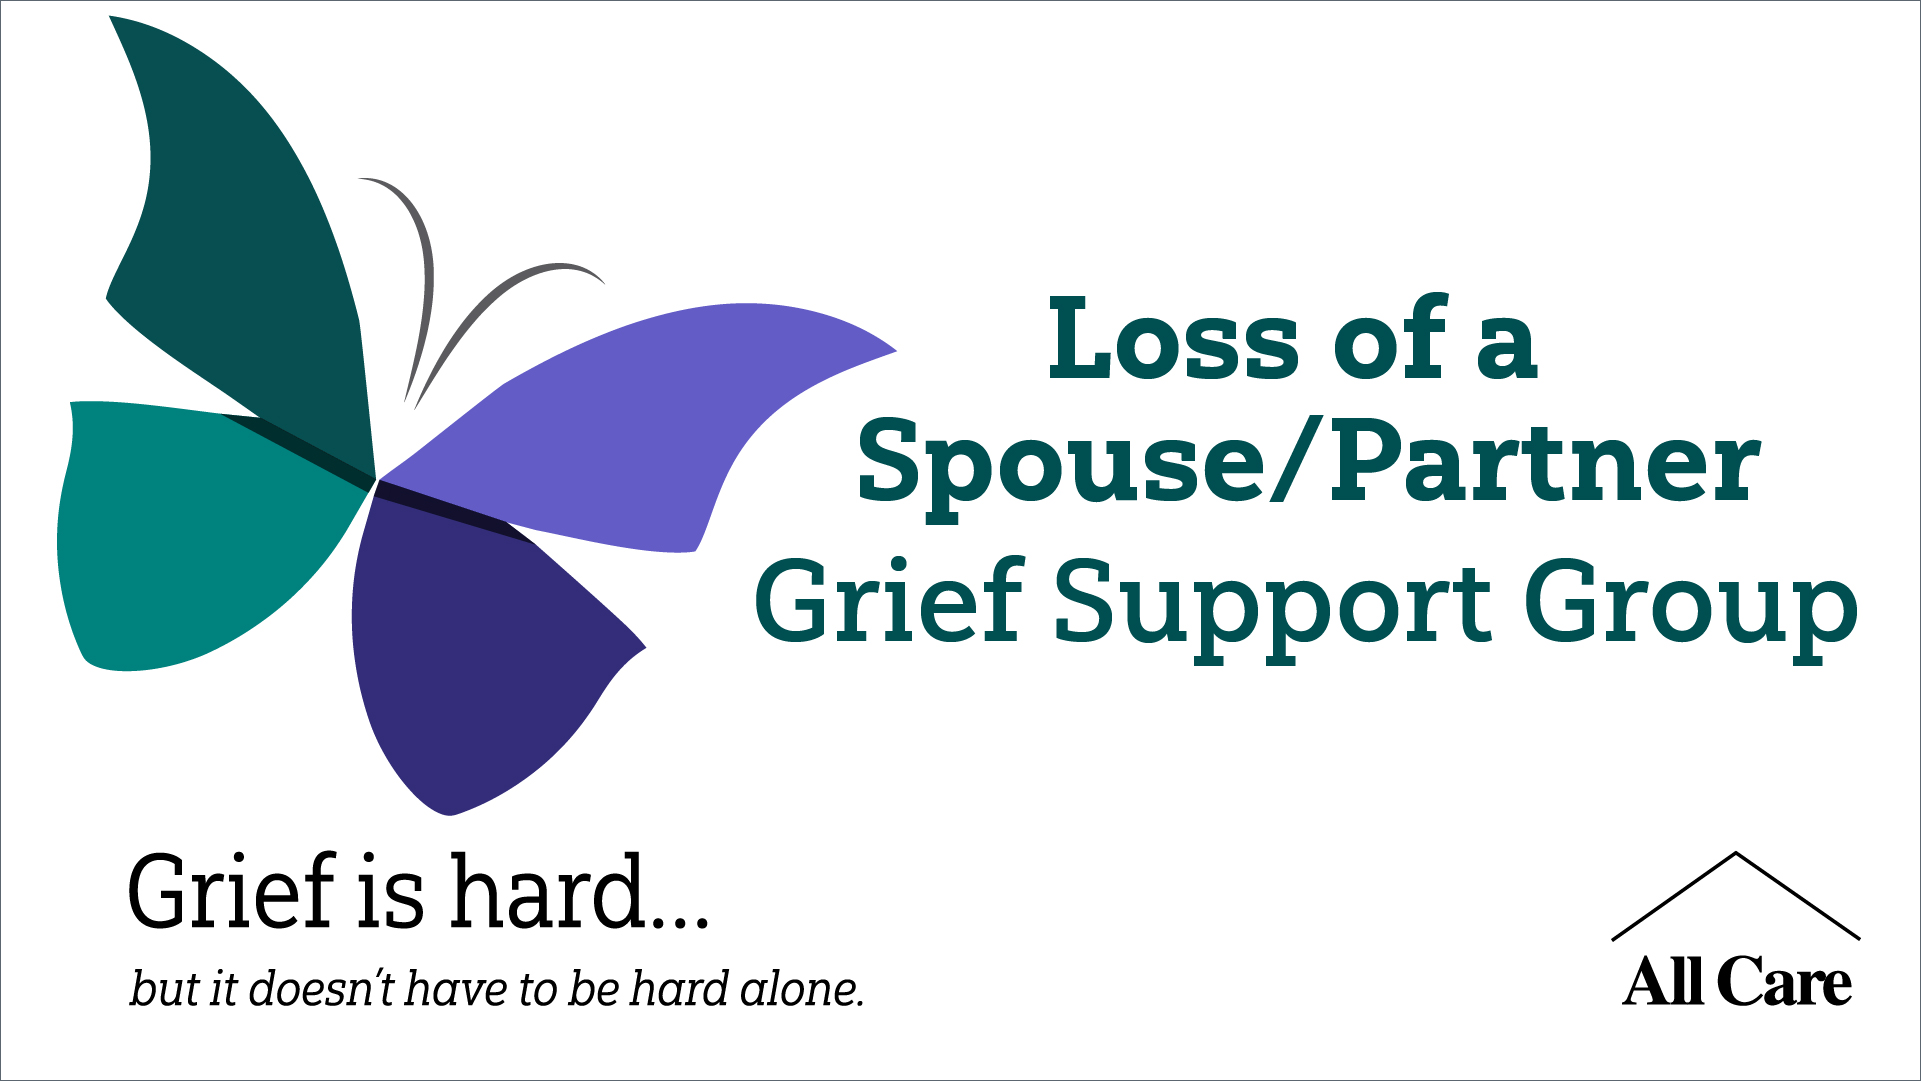 Loss of a Spouse/Partner Grief Support Group